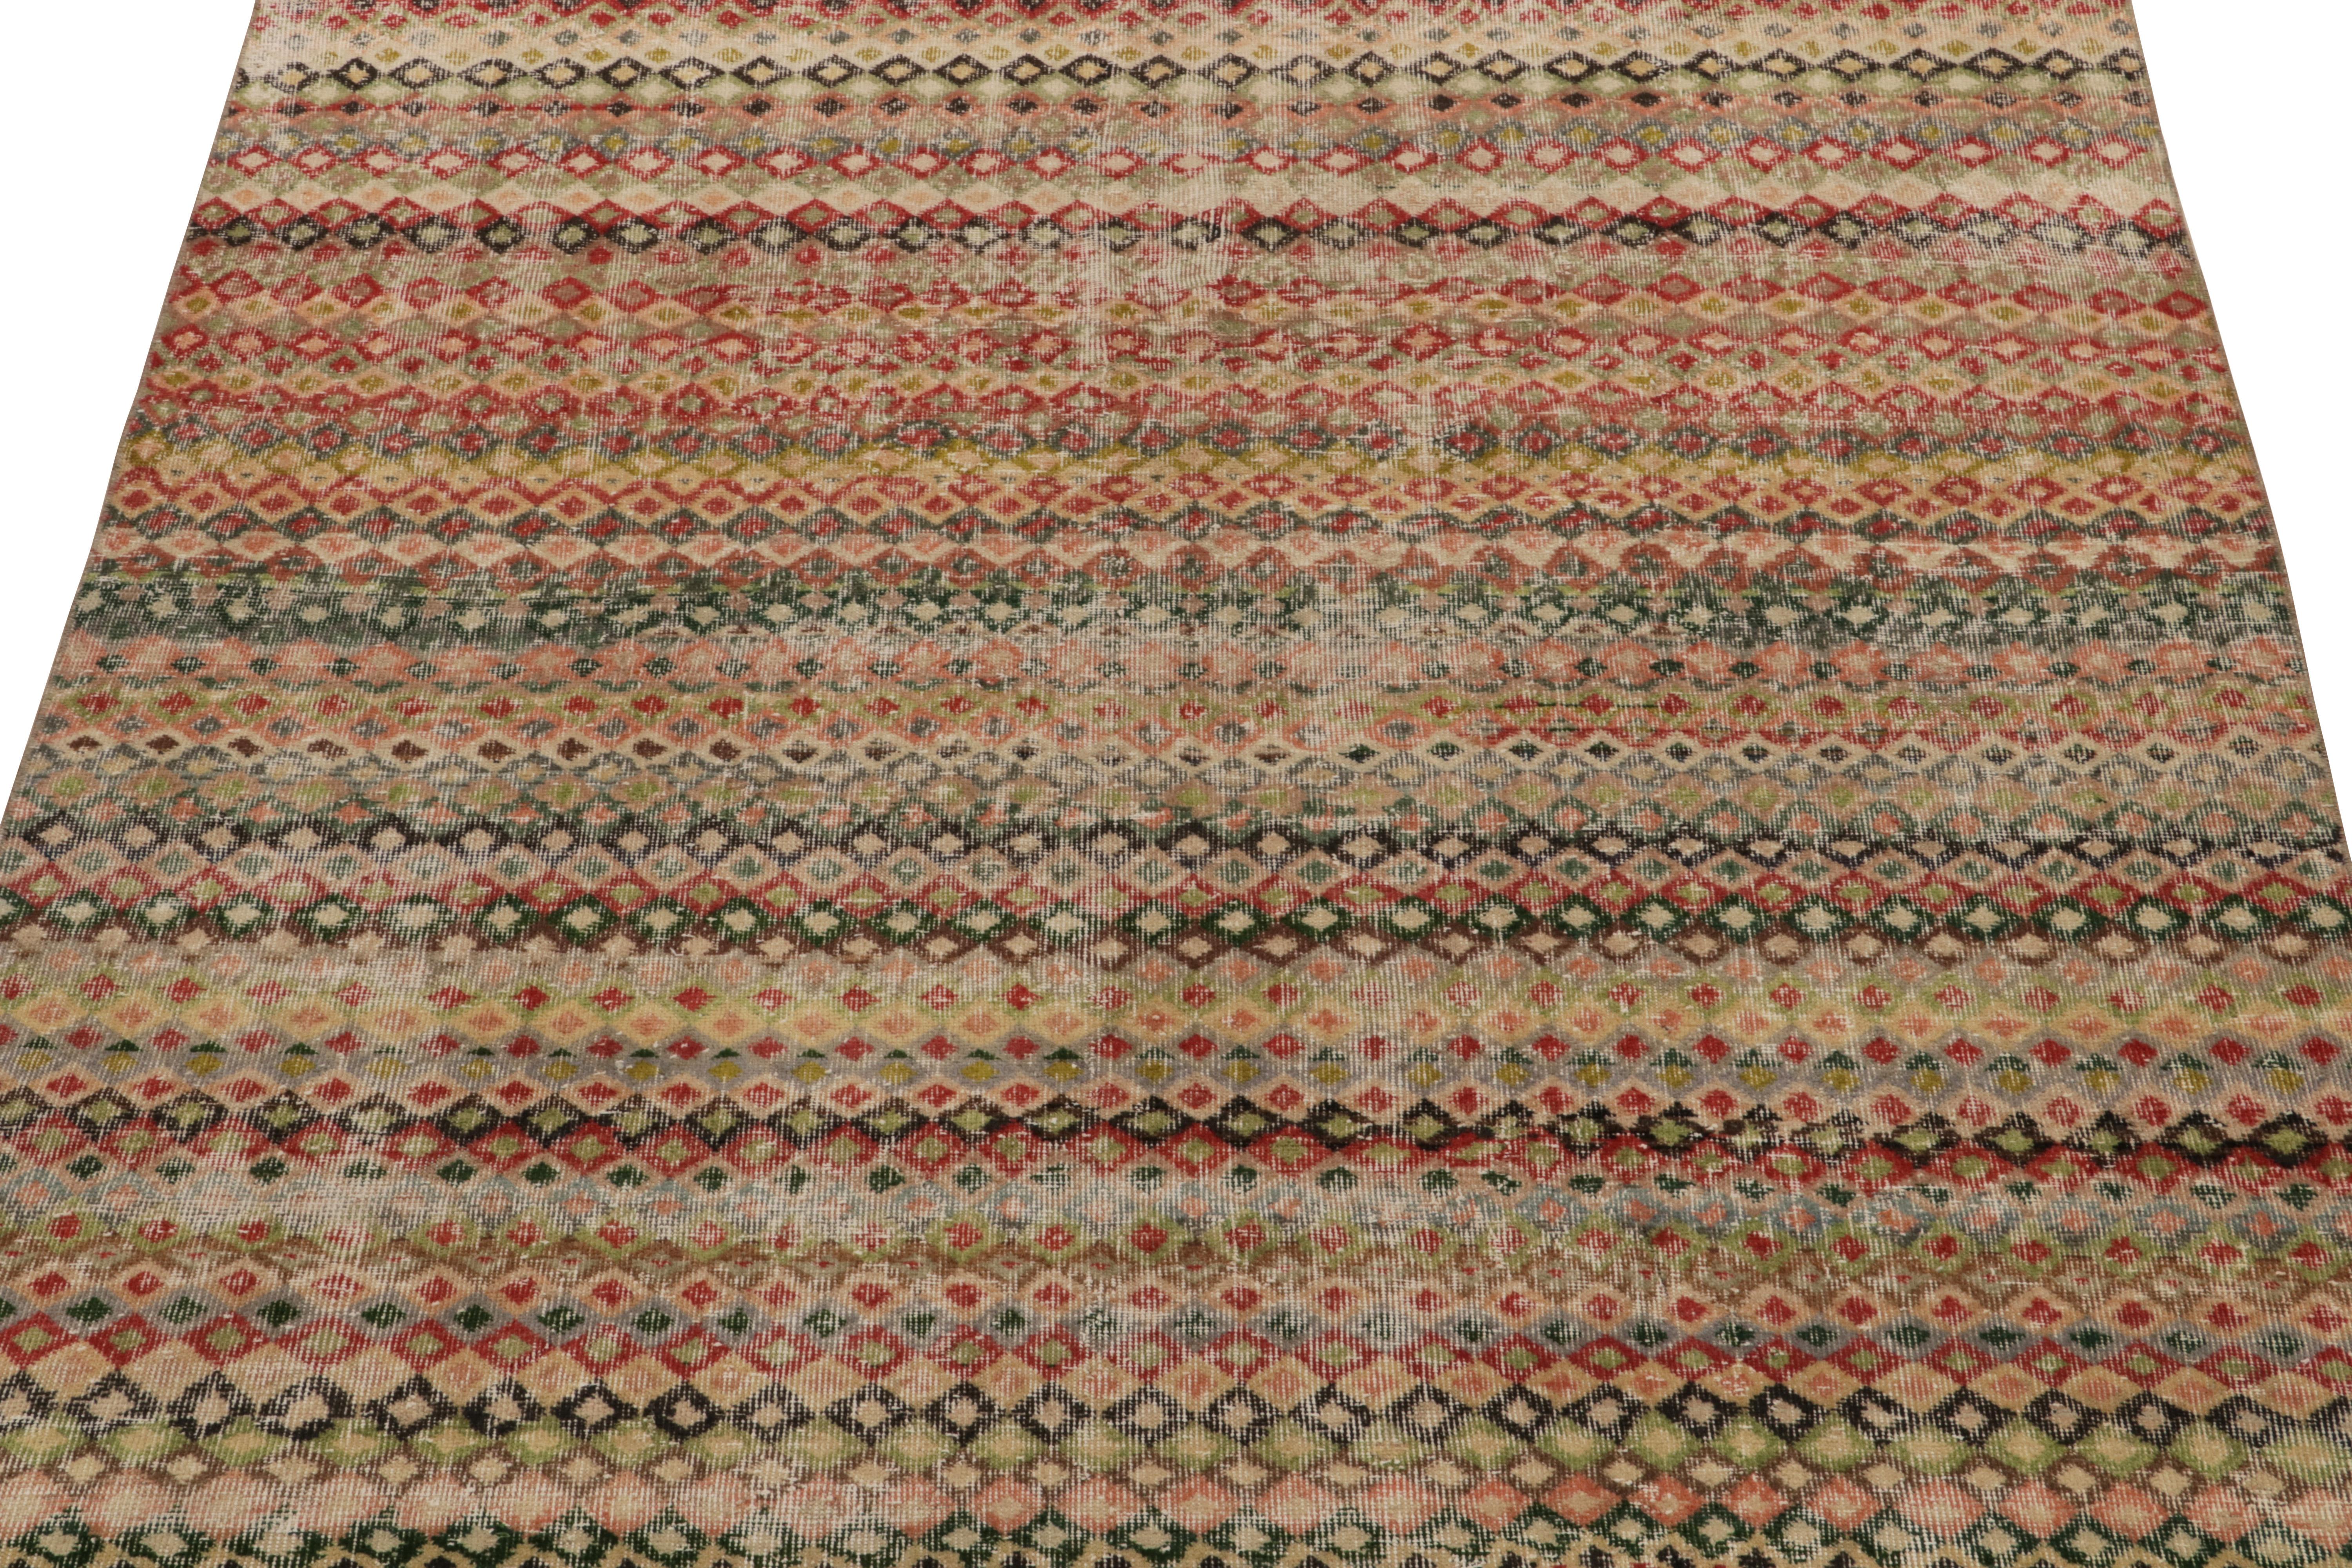 1960s Vintage Turkish Rug in Red, Green Geometric Pattern by Rug & Kilim In Good Condition For Sale In Long Island City, NY